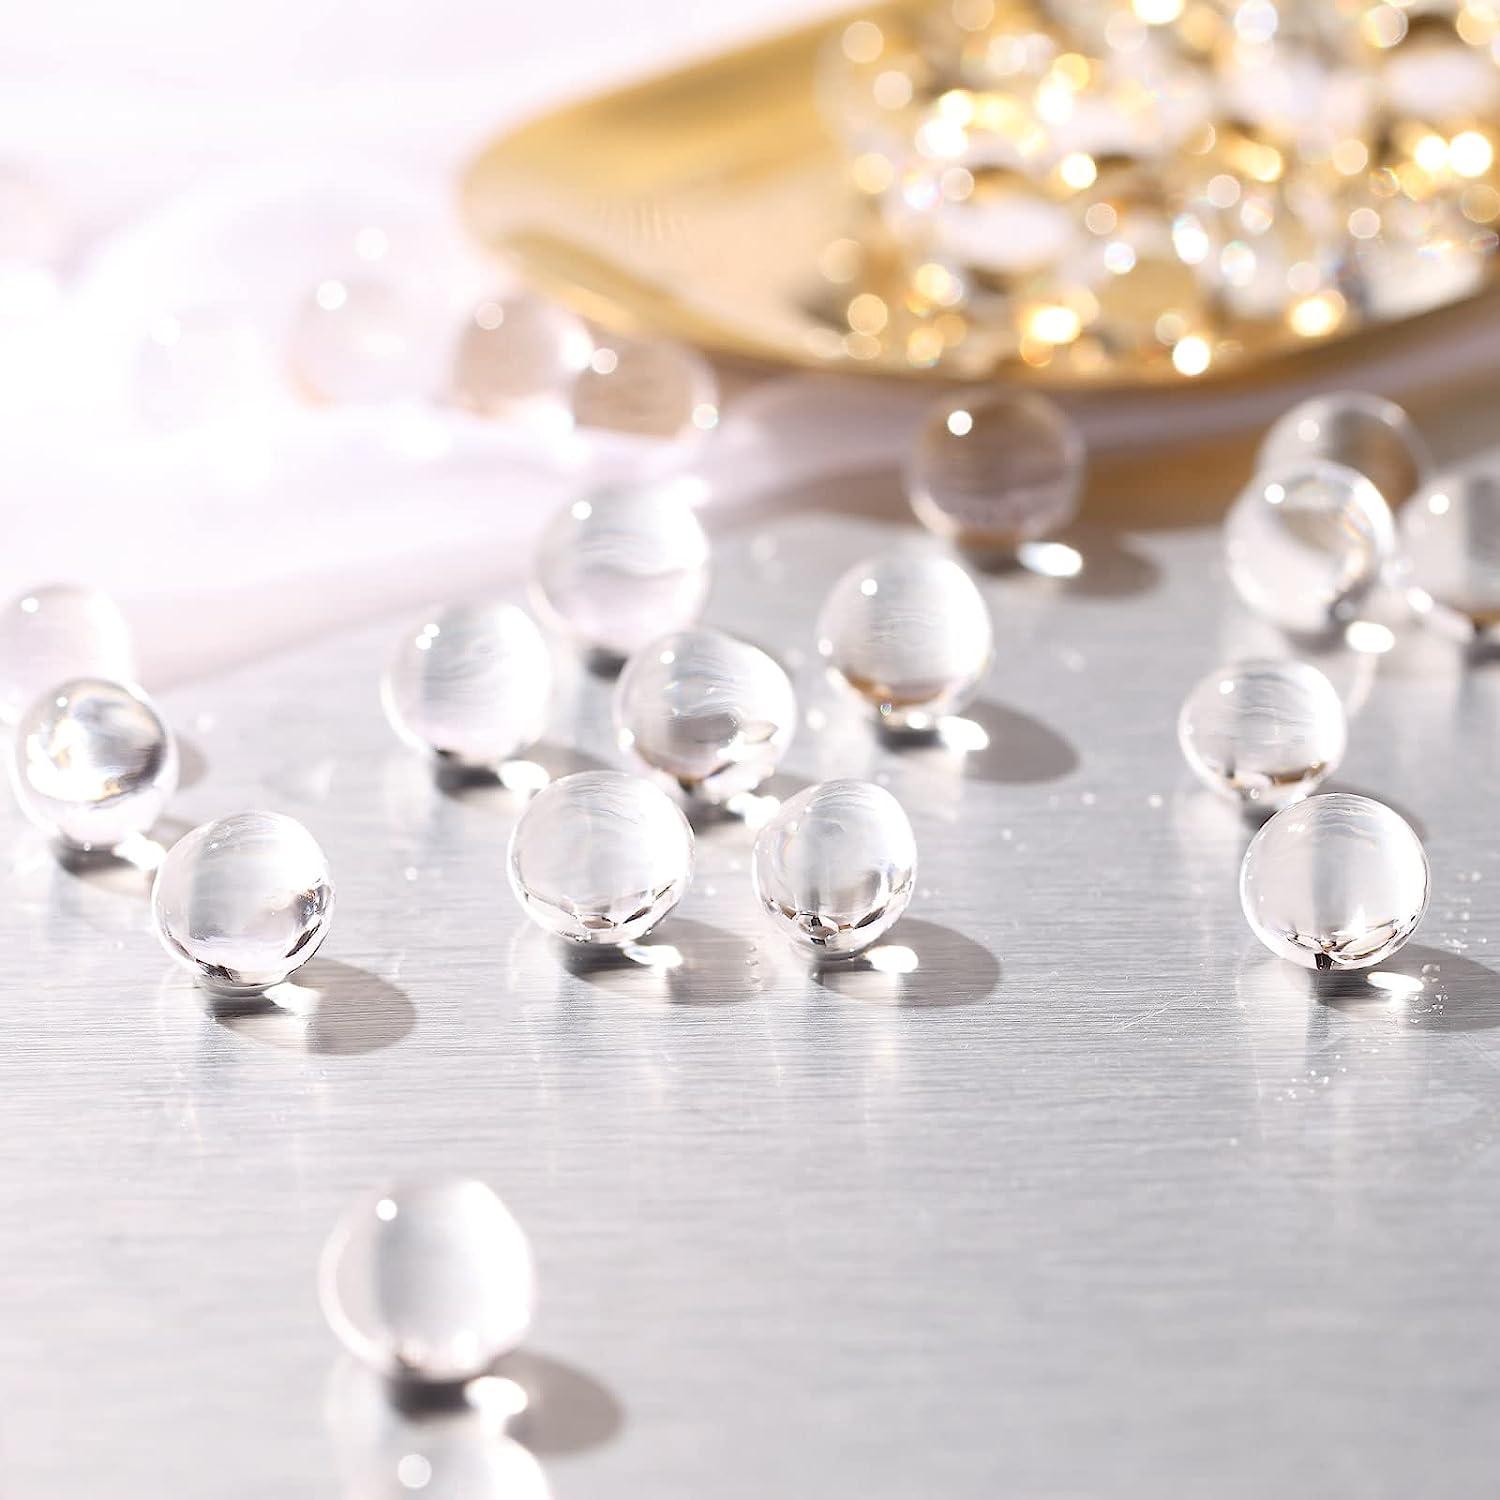 300g Floating Pearls + Clear Water Beads for Vases, Gold-Plated